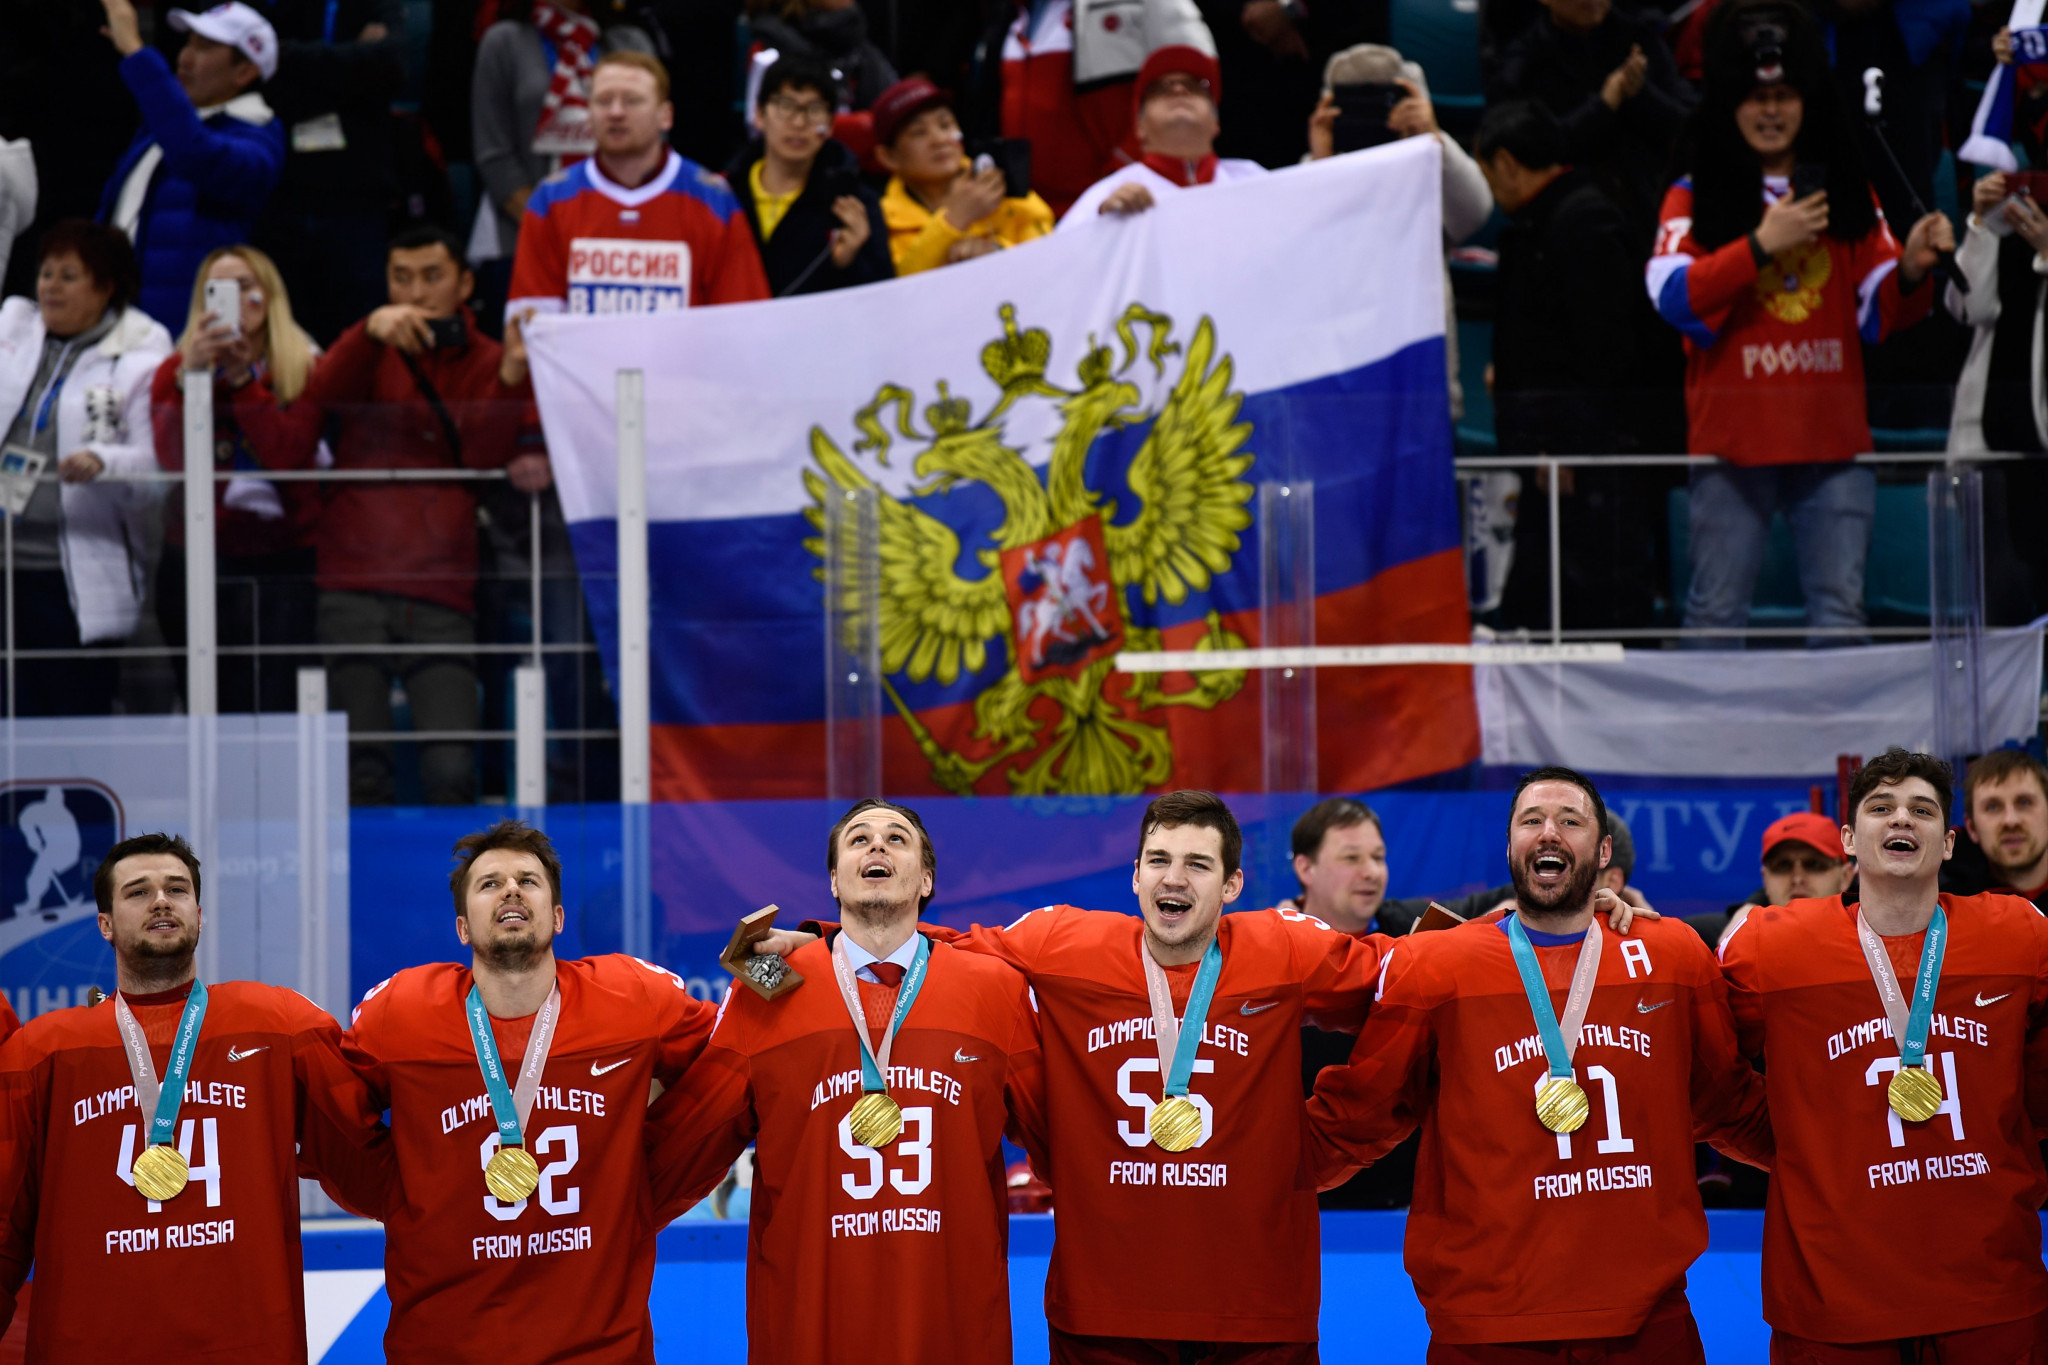 The OAR's players sung the Russian national anthem after receiving their gold medals ©Getty Images